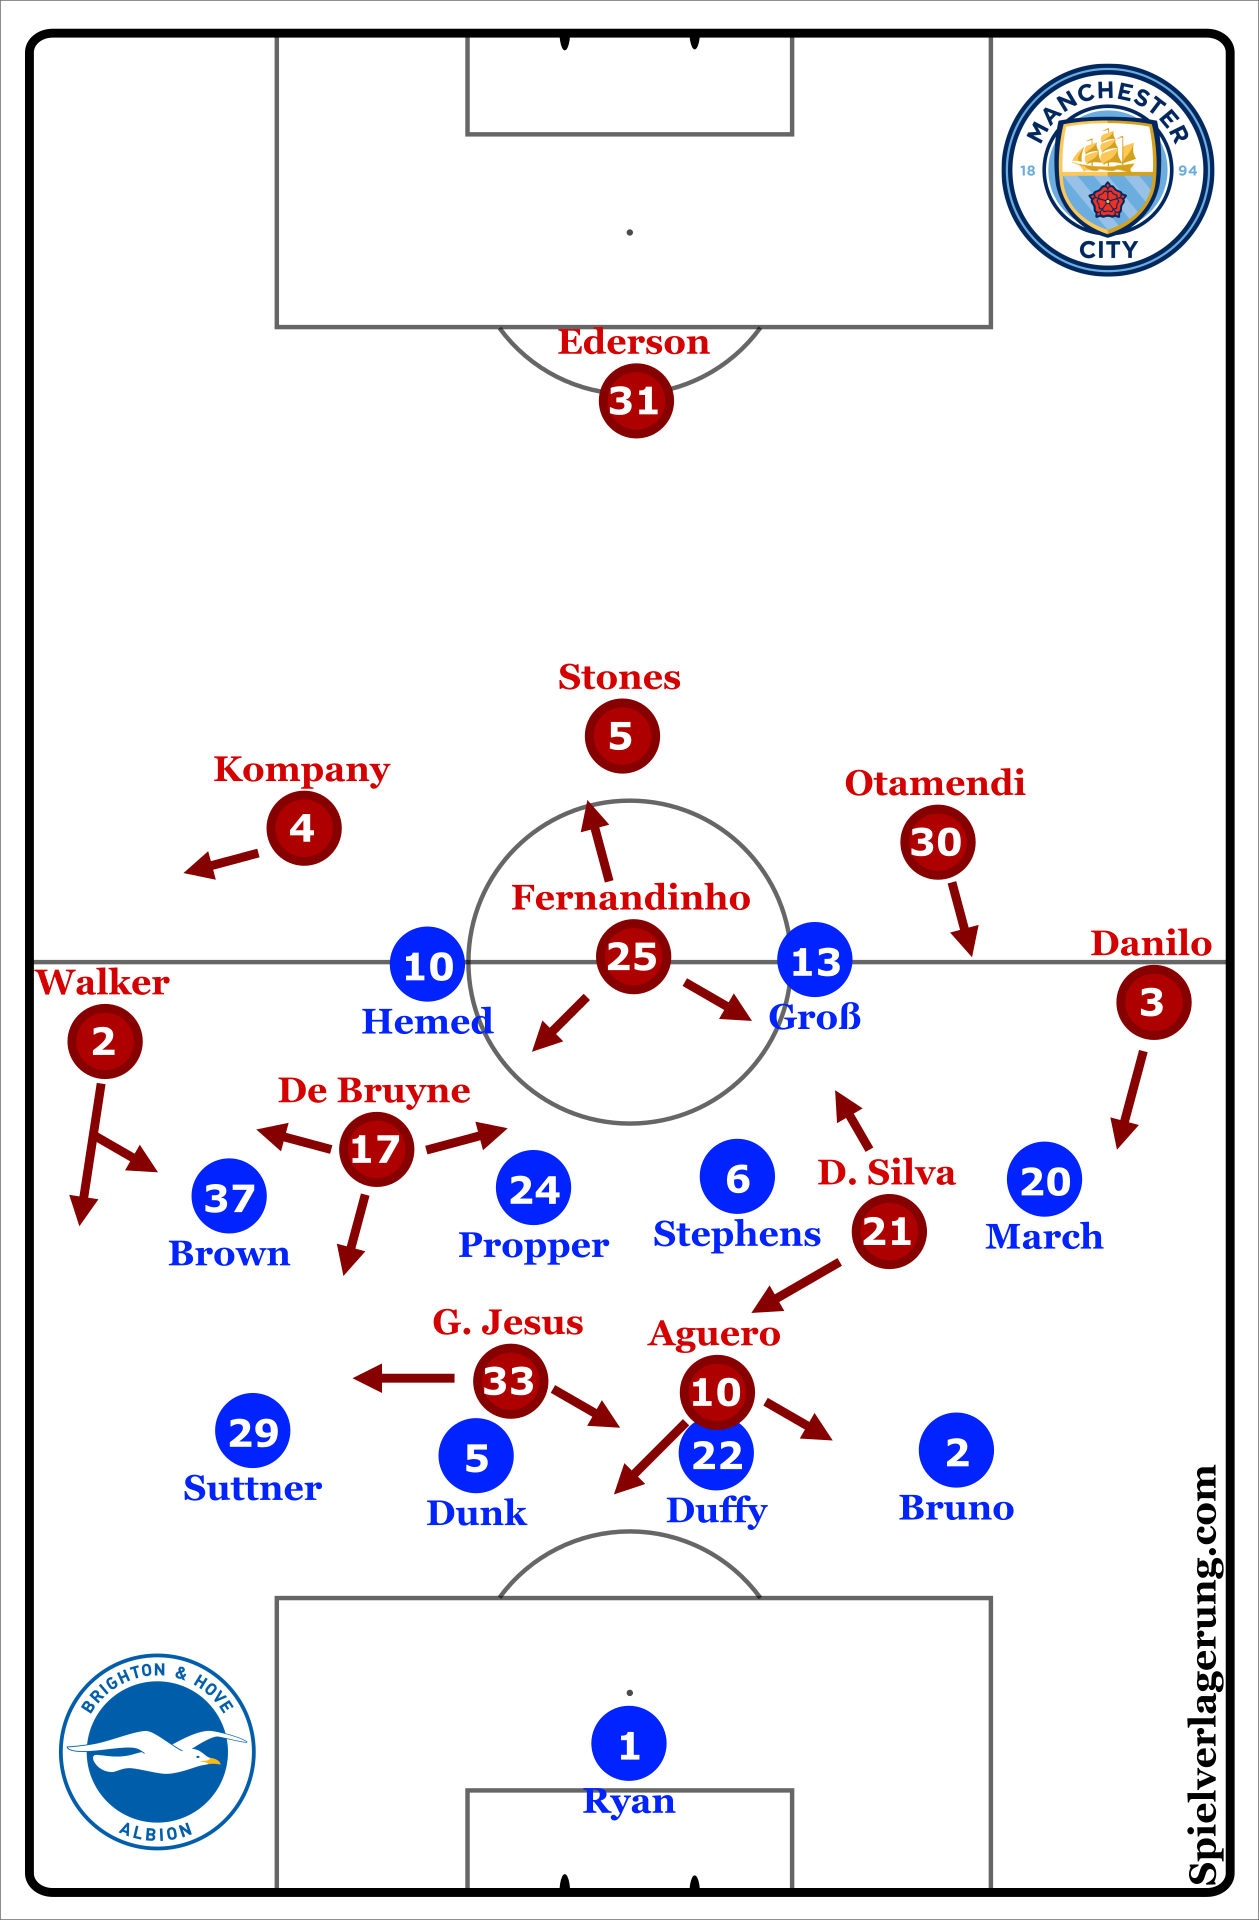 Starting XI and Formations for both clubs